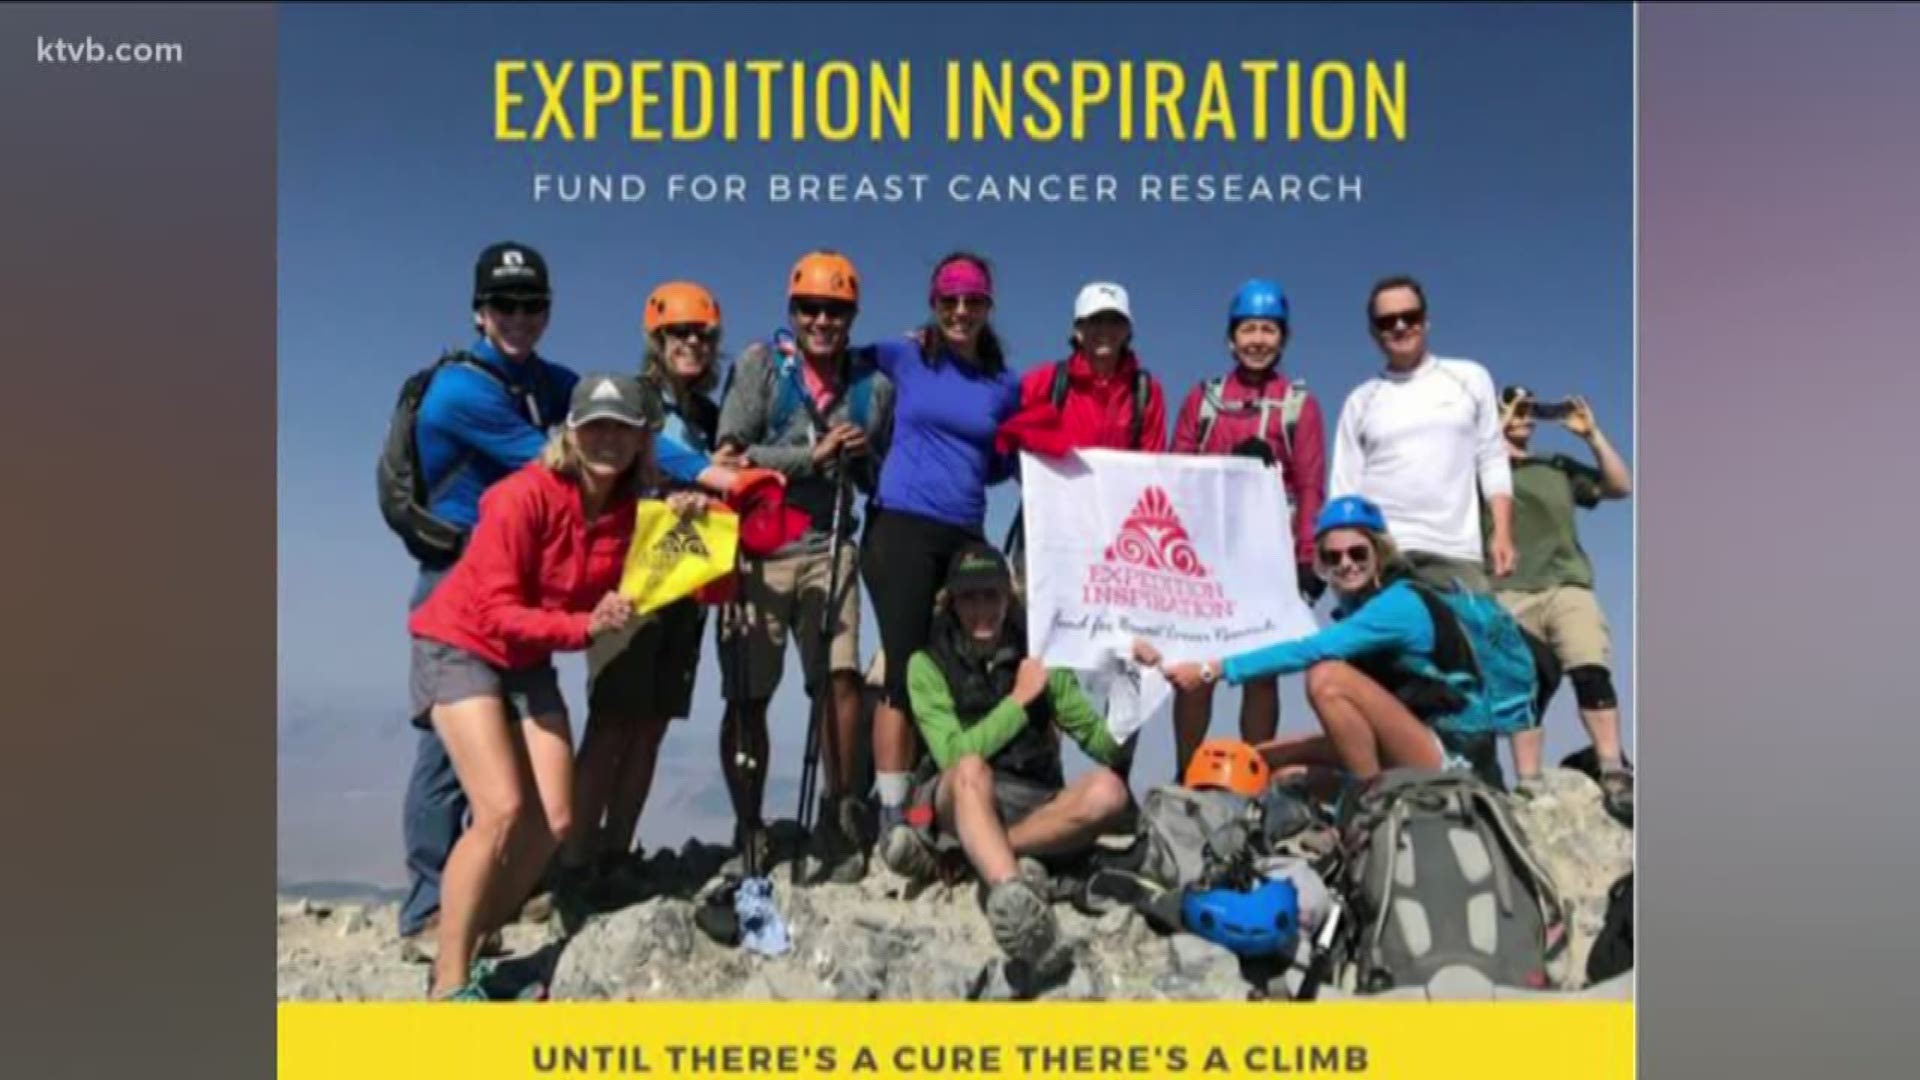 The group of women climbs mountains to raise money to fight breast cancer.